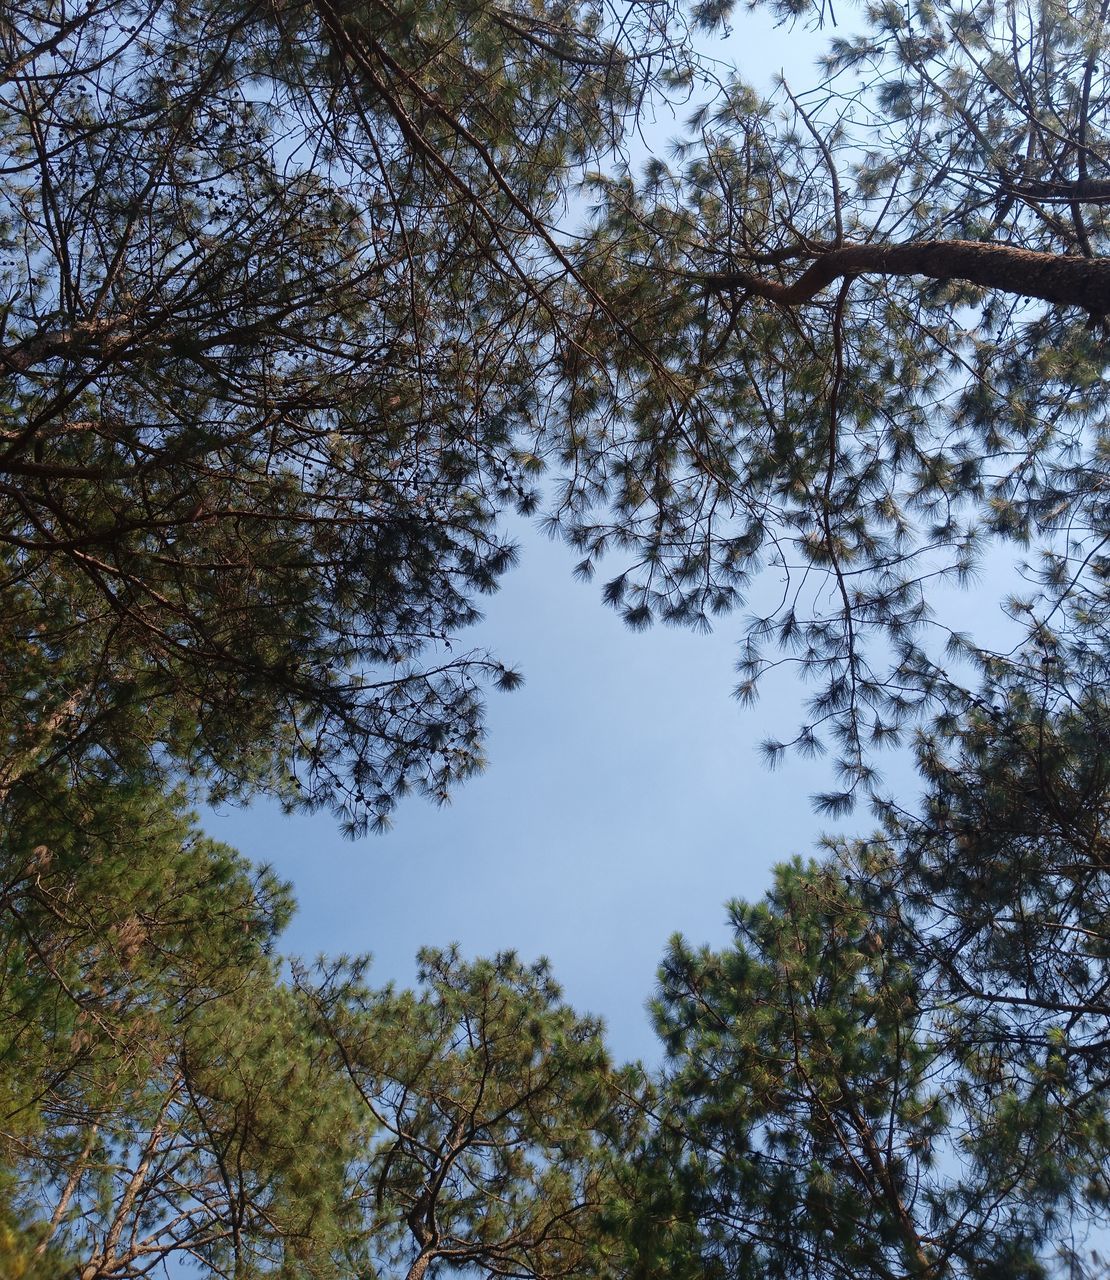 tree, plant, sky, leaf, branch, nature, forest, low angle view, beauty in nature, woodland, autumn, no people, growth, tranquility, day, sunlight, outdoors, tree canopy, scenics - nature, flower, directly below, land, blue, environment, pine tree, green